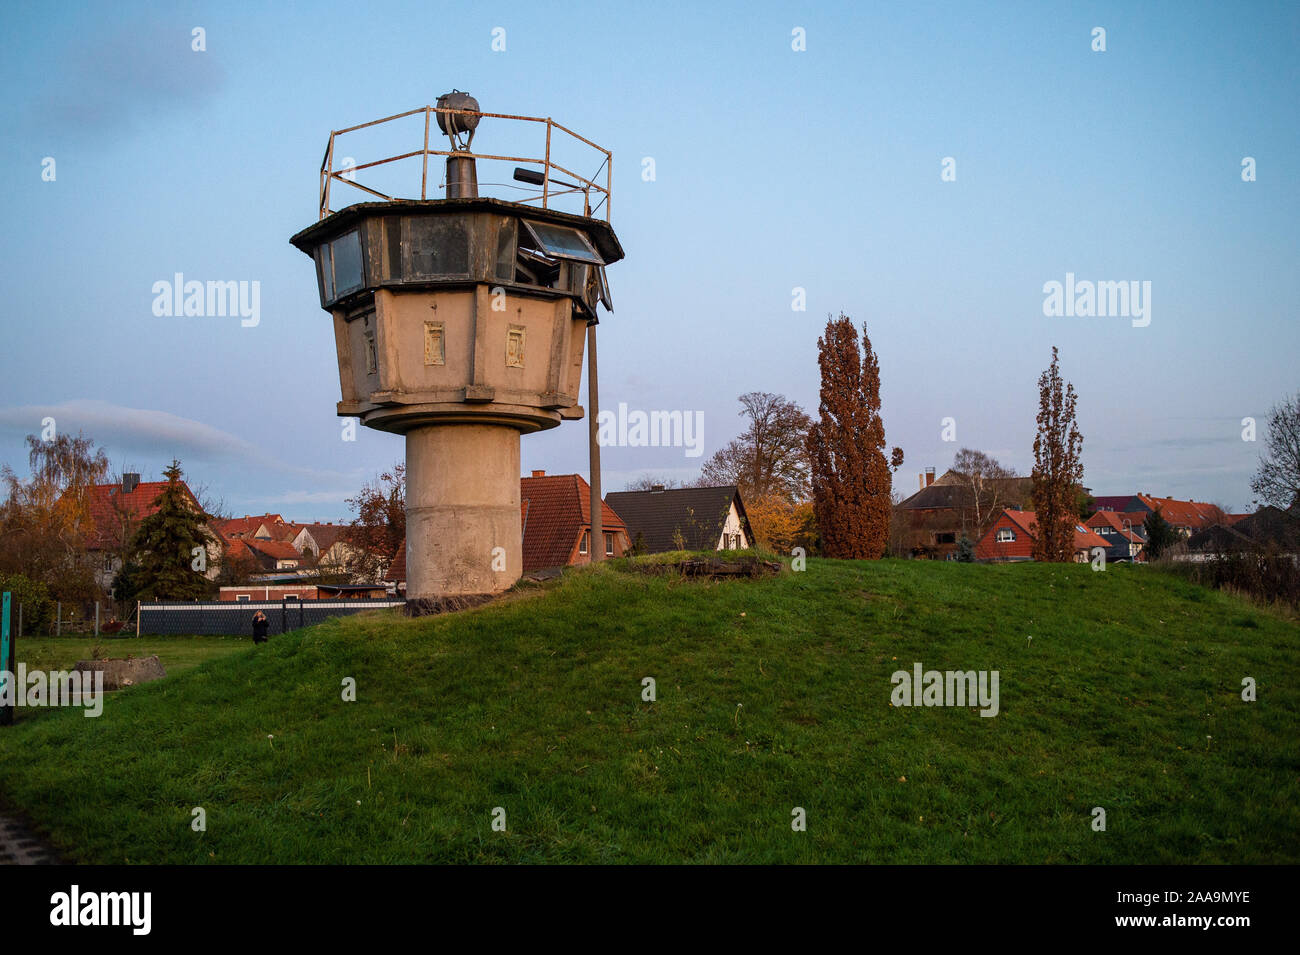 19 November 2019, Saxony-Anhalt, Hötensleben: An observation tower in the border museum Hötensleben. The preserved complex was once part of the inner-German border. In the background you can see buildings of the village. Photo: Klaus-Dietmar Gabbert/dpa-Zentralbild/ZB Stock Photo